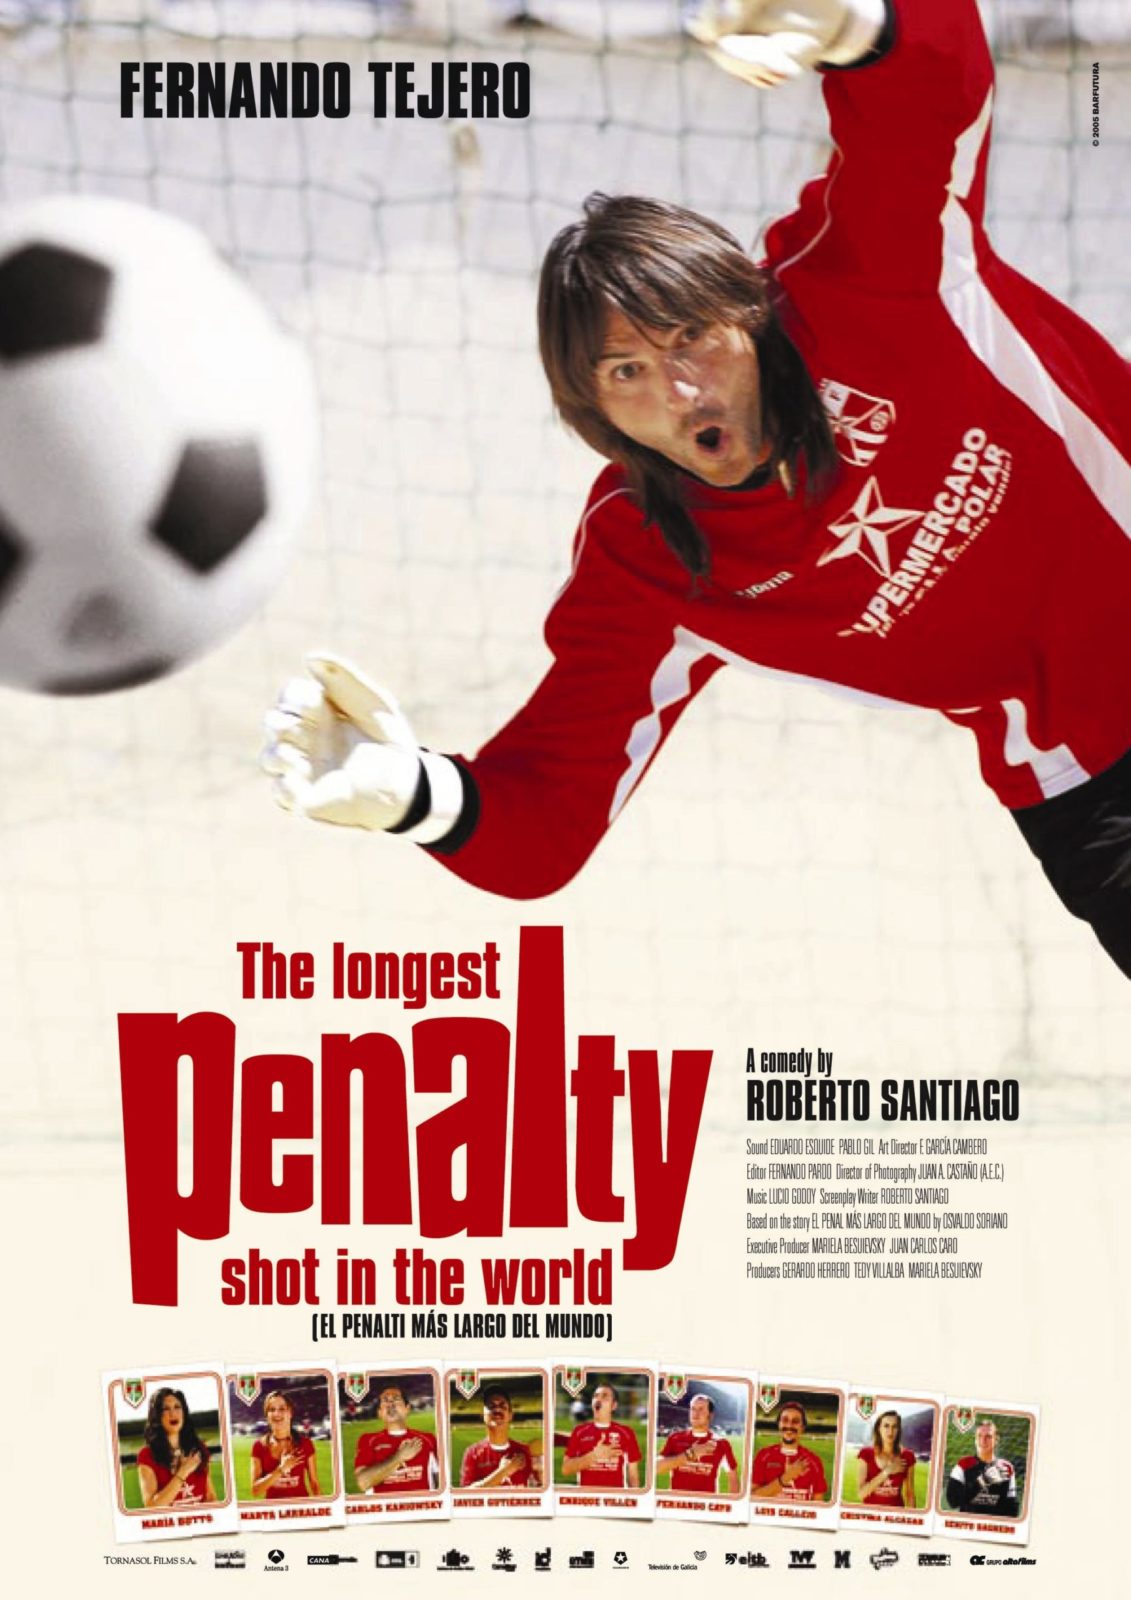 THE LONGEST PENALTY SHOT IN THE WORLD